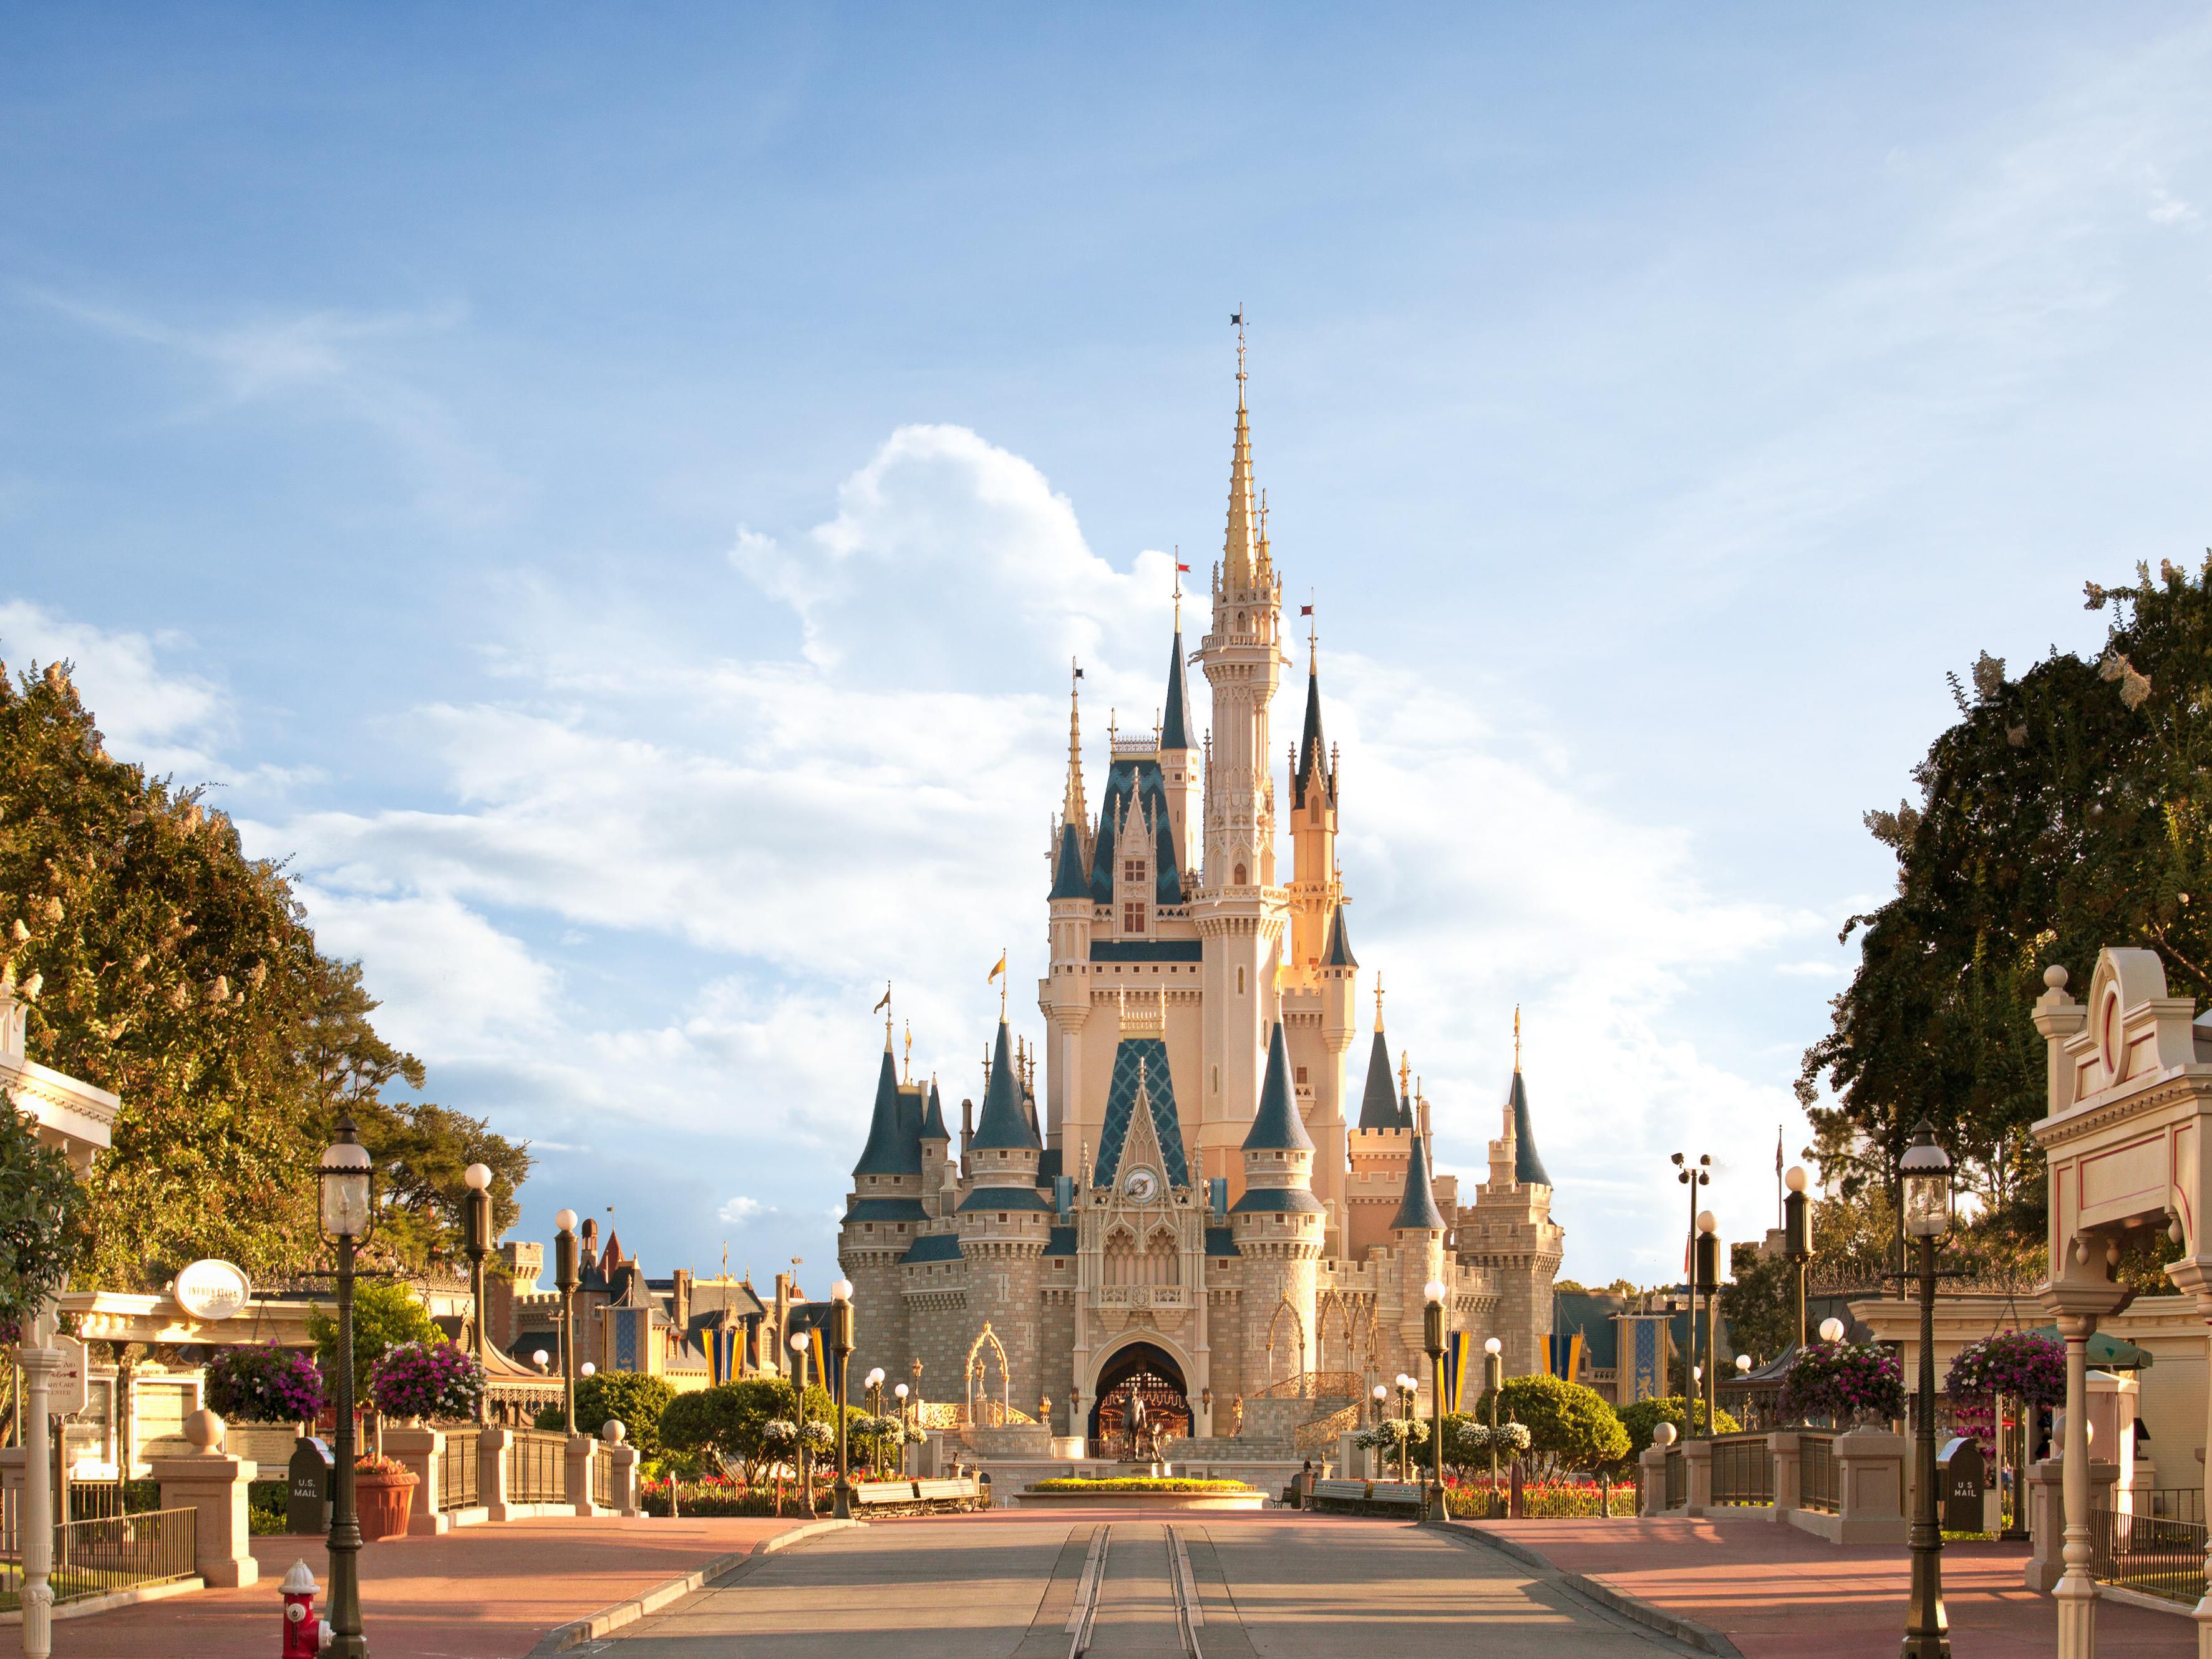 As an official hotel of the Walt Disney World Resort our guests can get a 30-minute jump on their Disney day with early theme park entry—available at all 4 Walt Disney World theme parks. 

A Park reservation and valid ticket or pass for the same Park on the same date and valid Resort ID are required.
